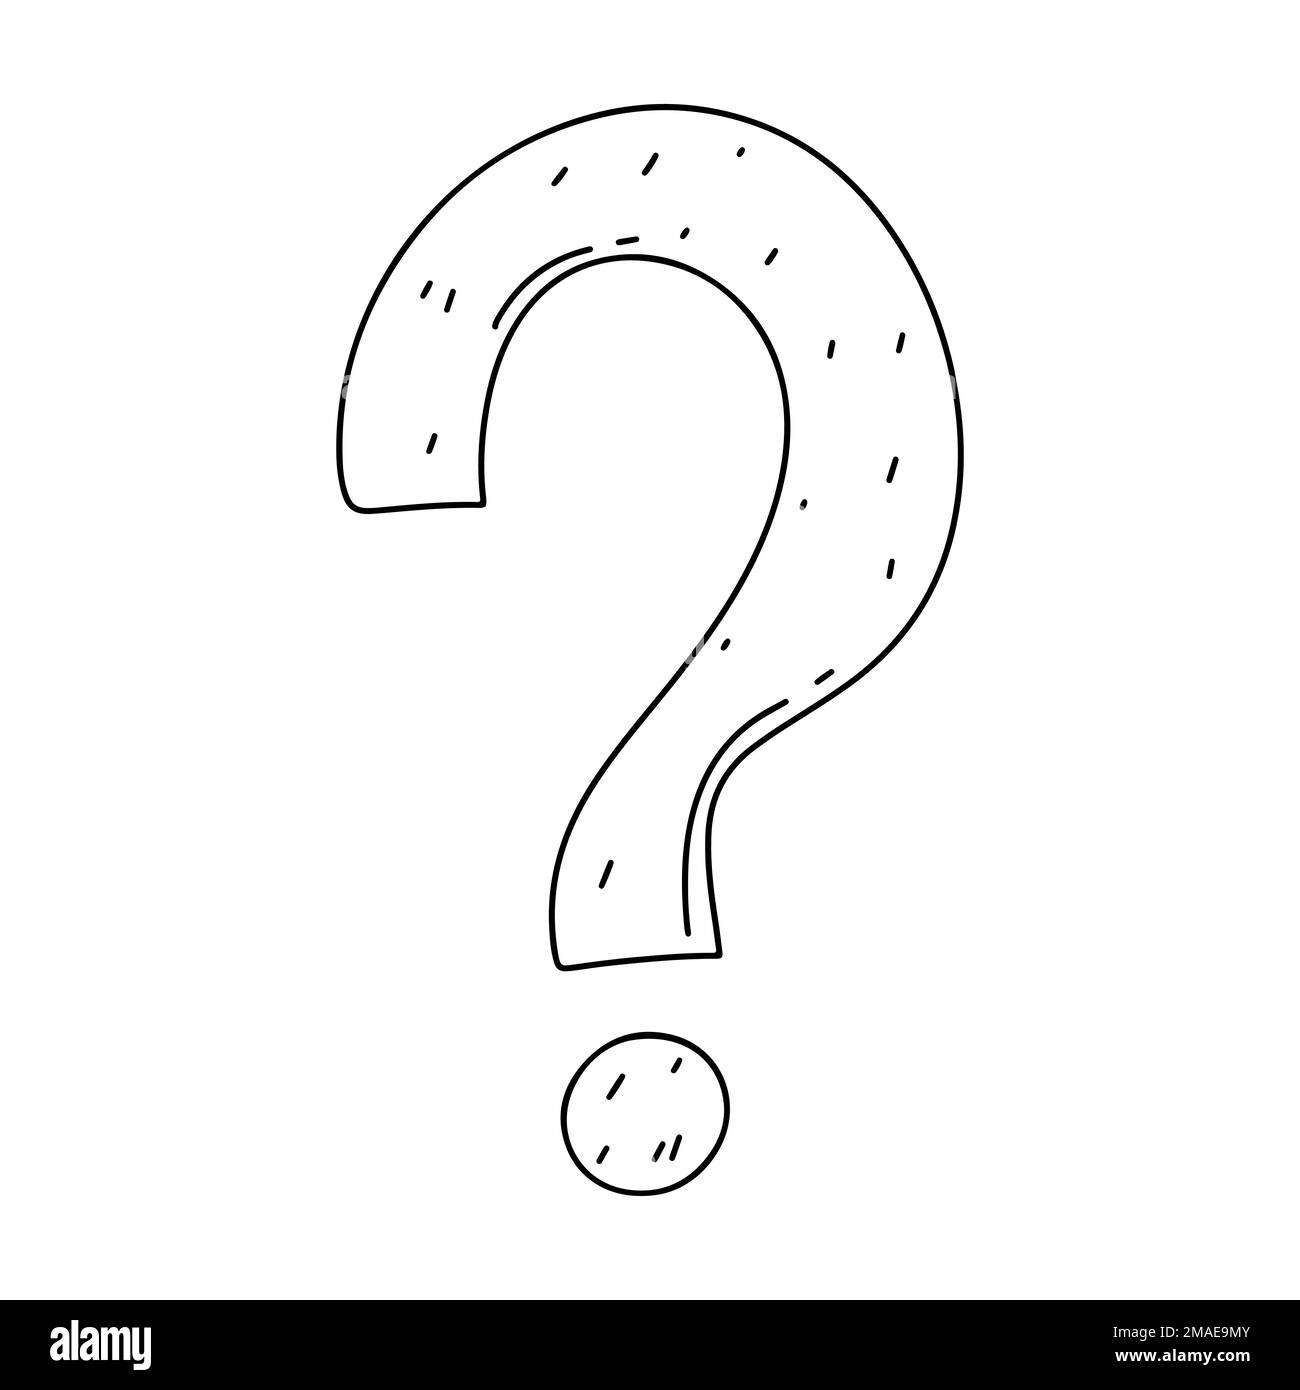 Question Mark in hand drawn doodle style. Vector illustration isolated on white background Stock Vector